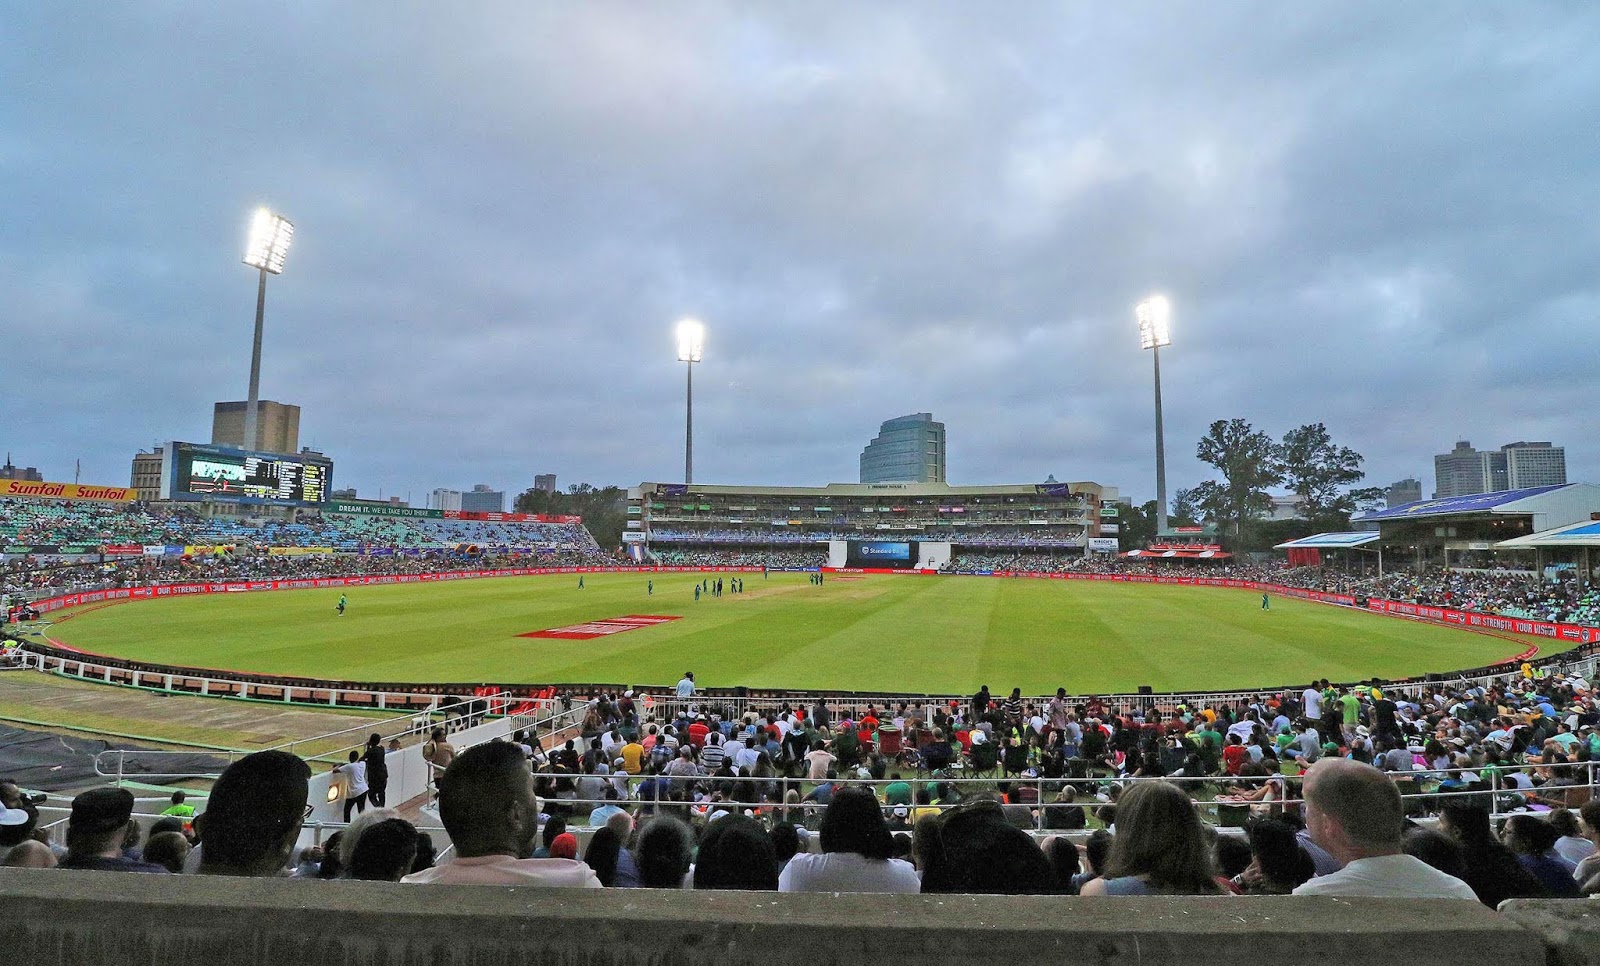 Kingsmead Cricket Ground during the South Africa vs Pakistan One Day International on Tuesday 22nd January 2019